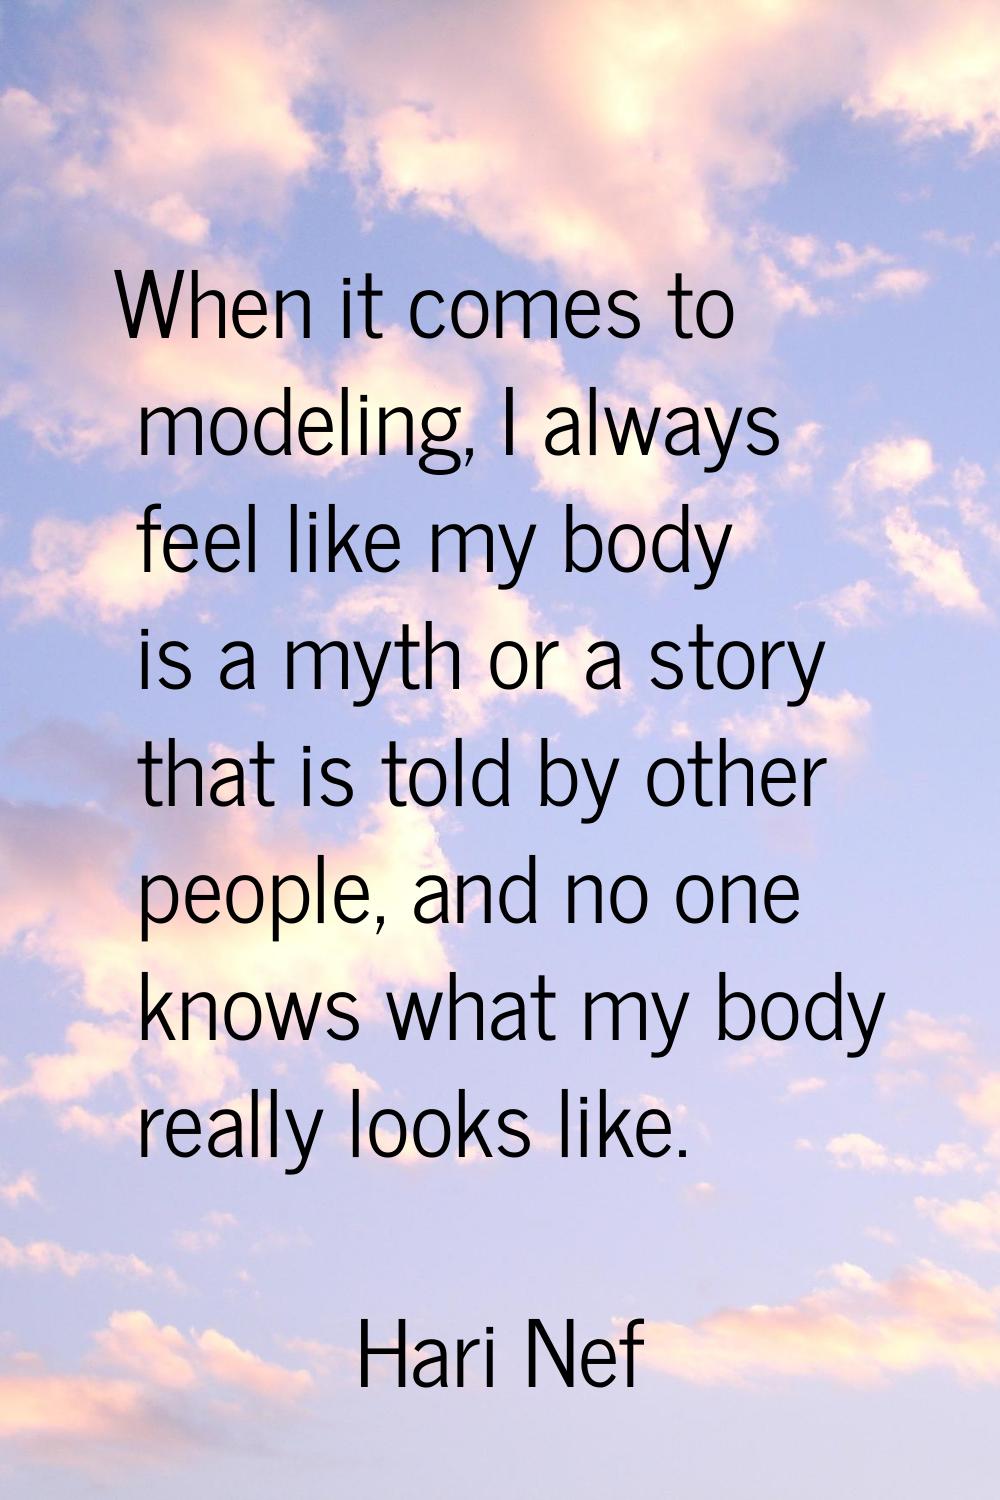 When it comes to modeling, I always feel like my body is a myth or a story that is told by other pe